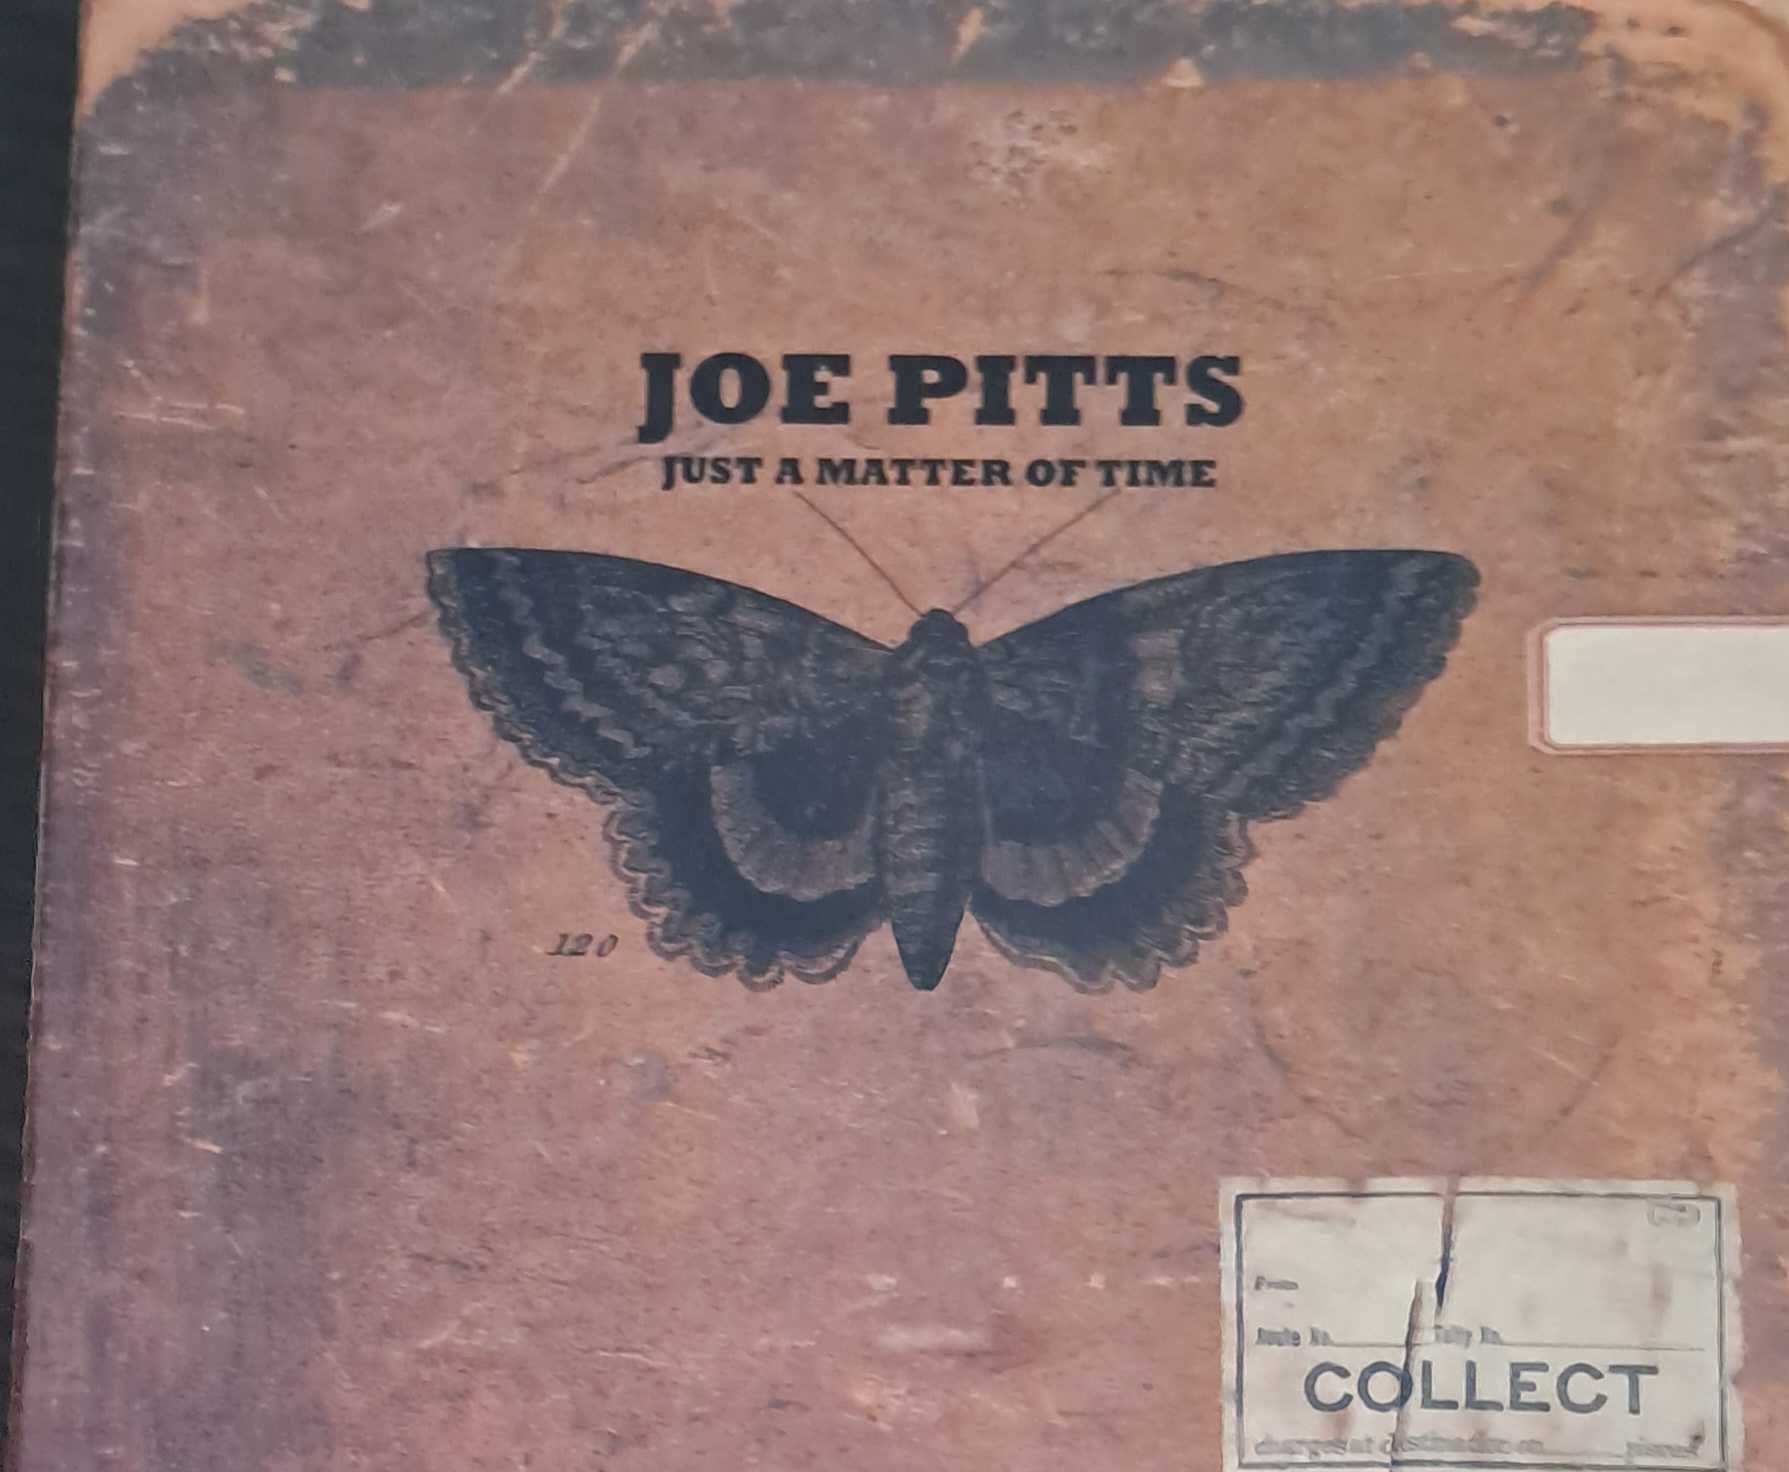 Joe Pitts - "Just a matter of time"